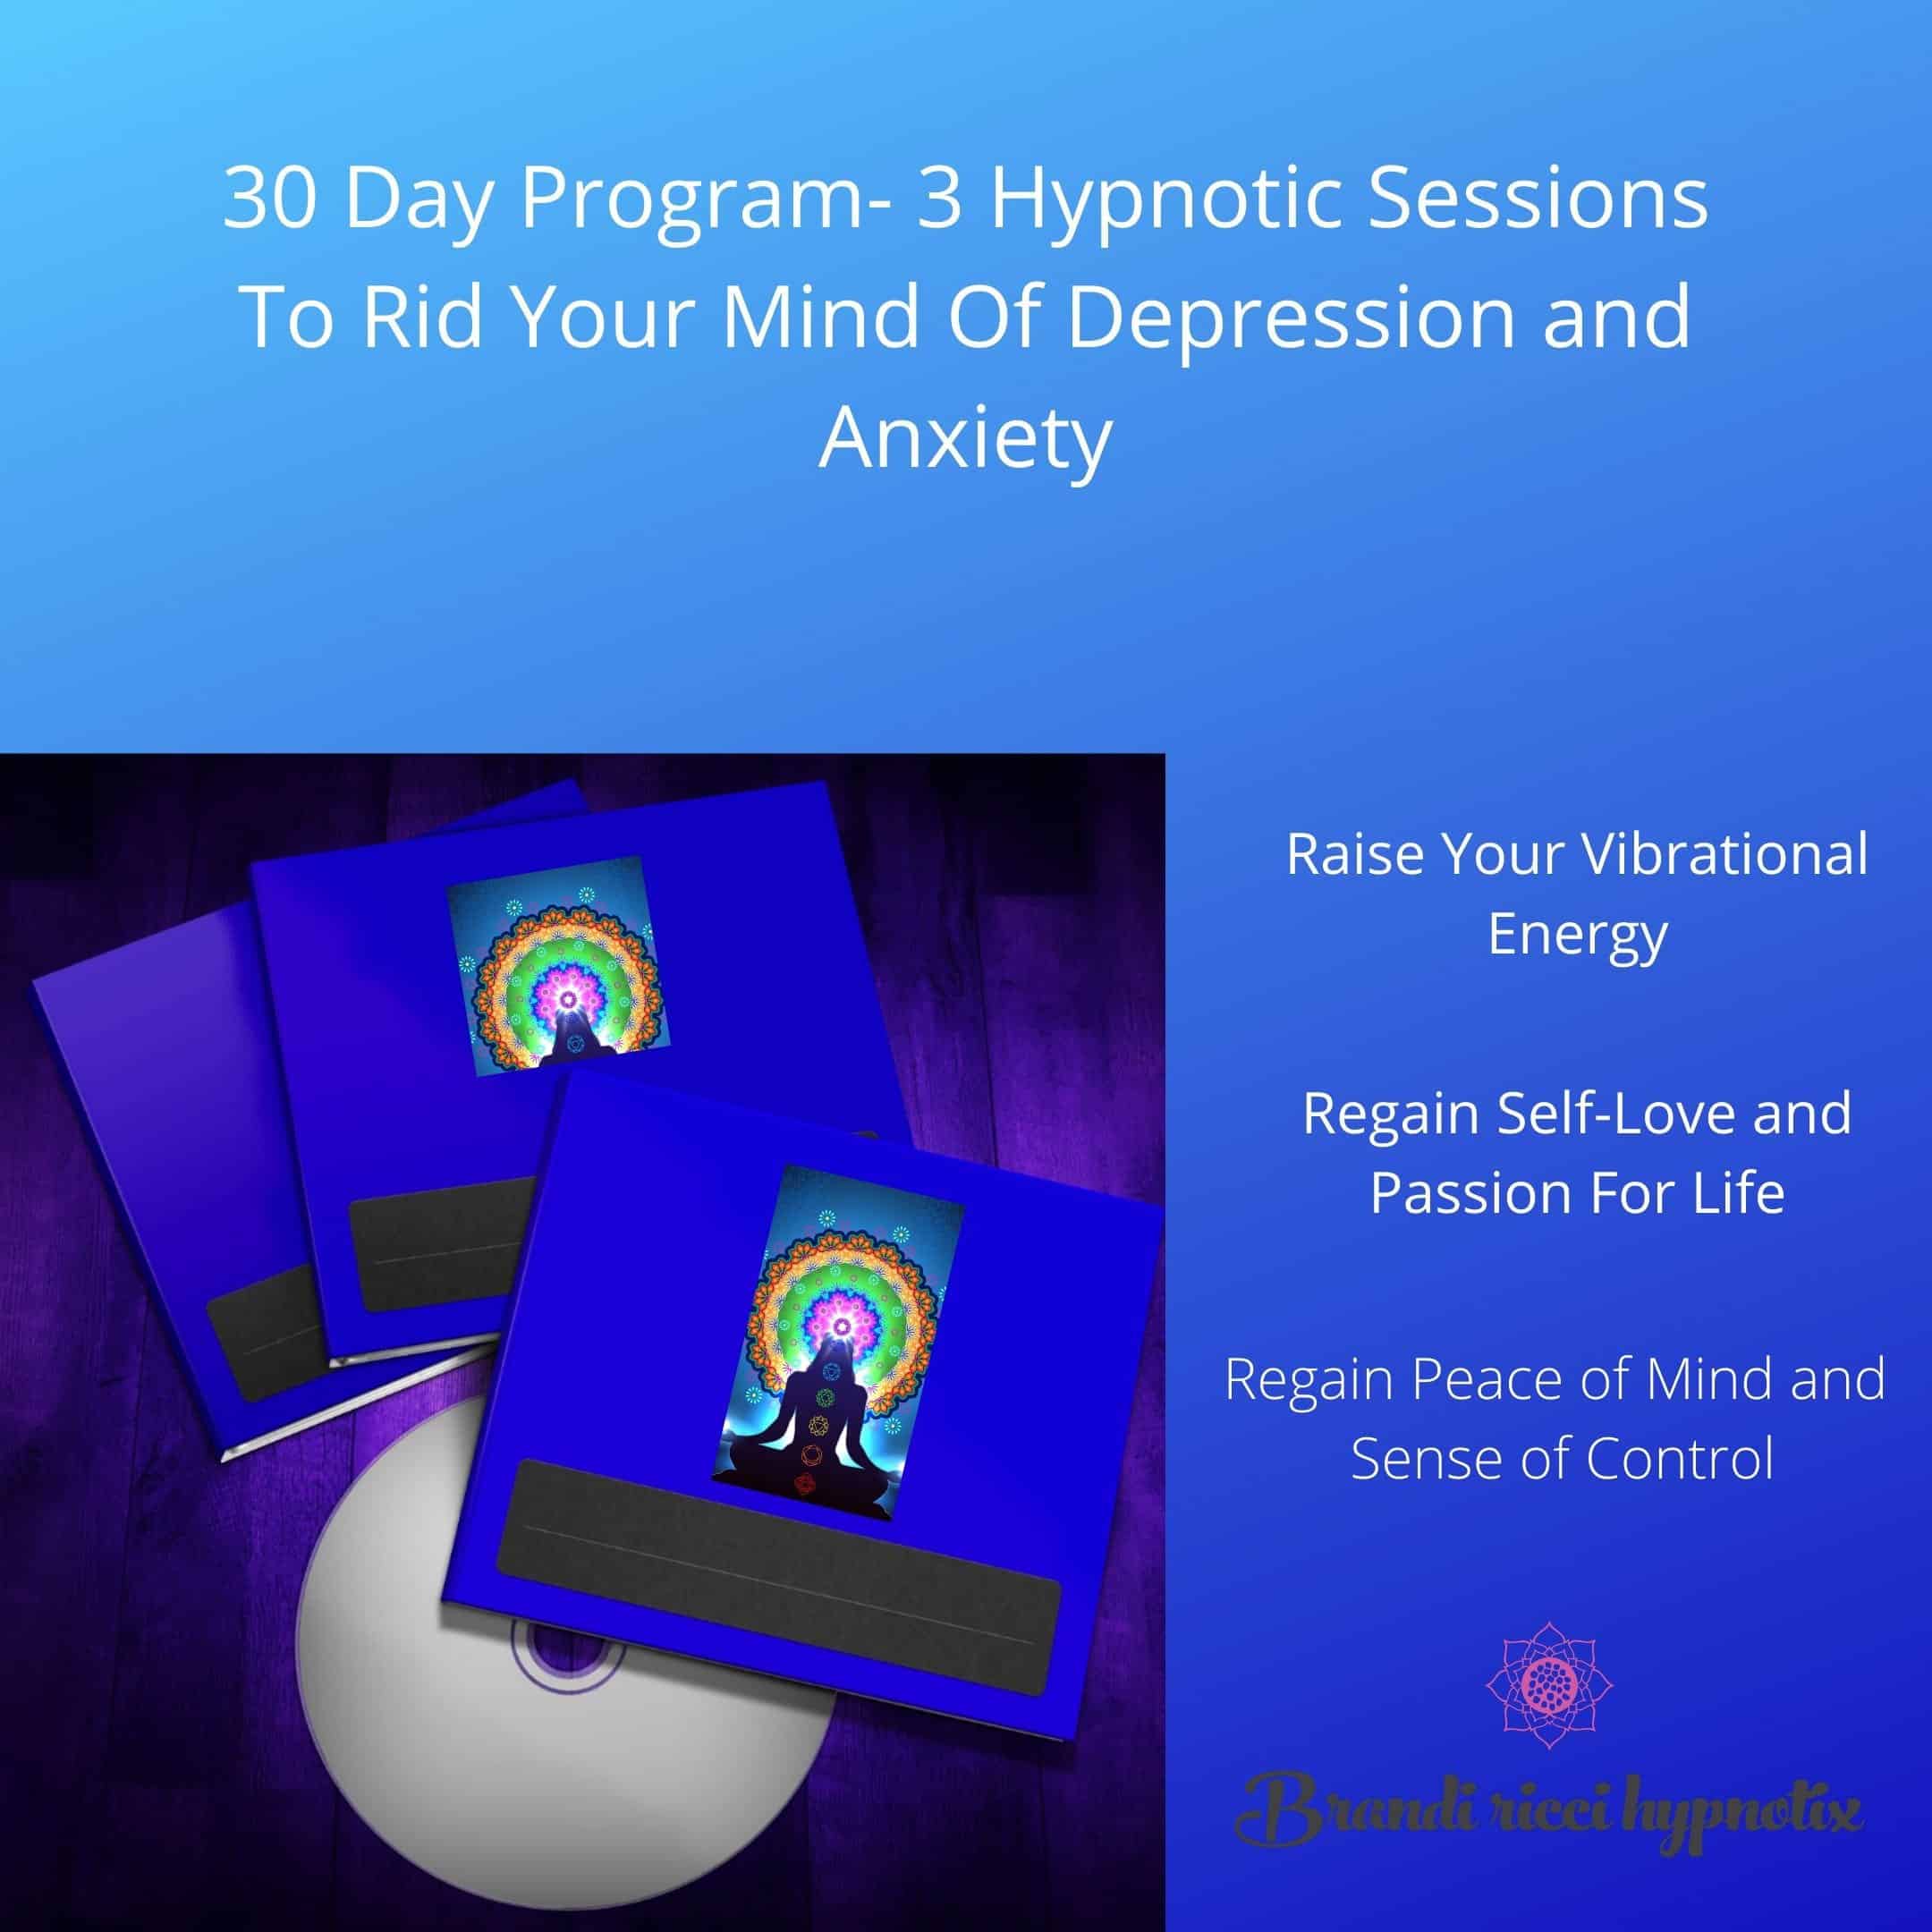 Hypnosis Program For Depression and Anxiety: 30 Days to Raise